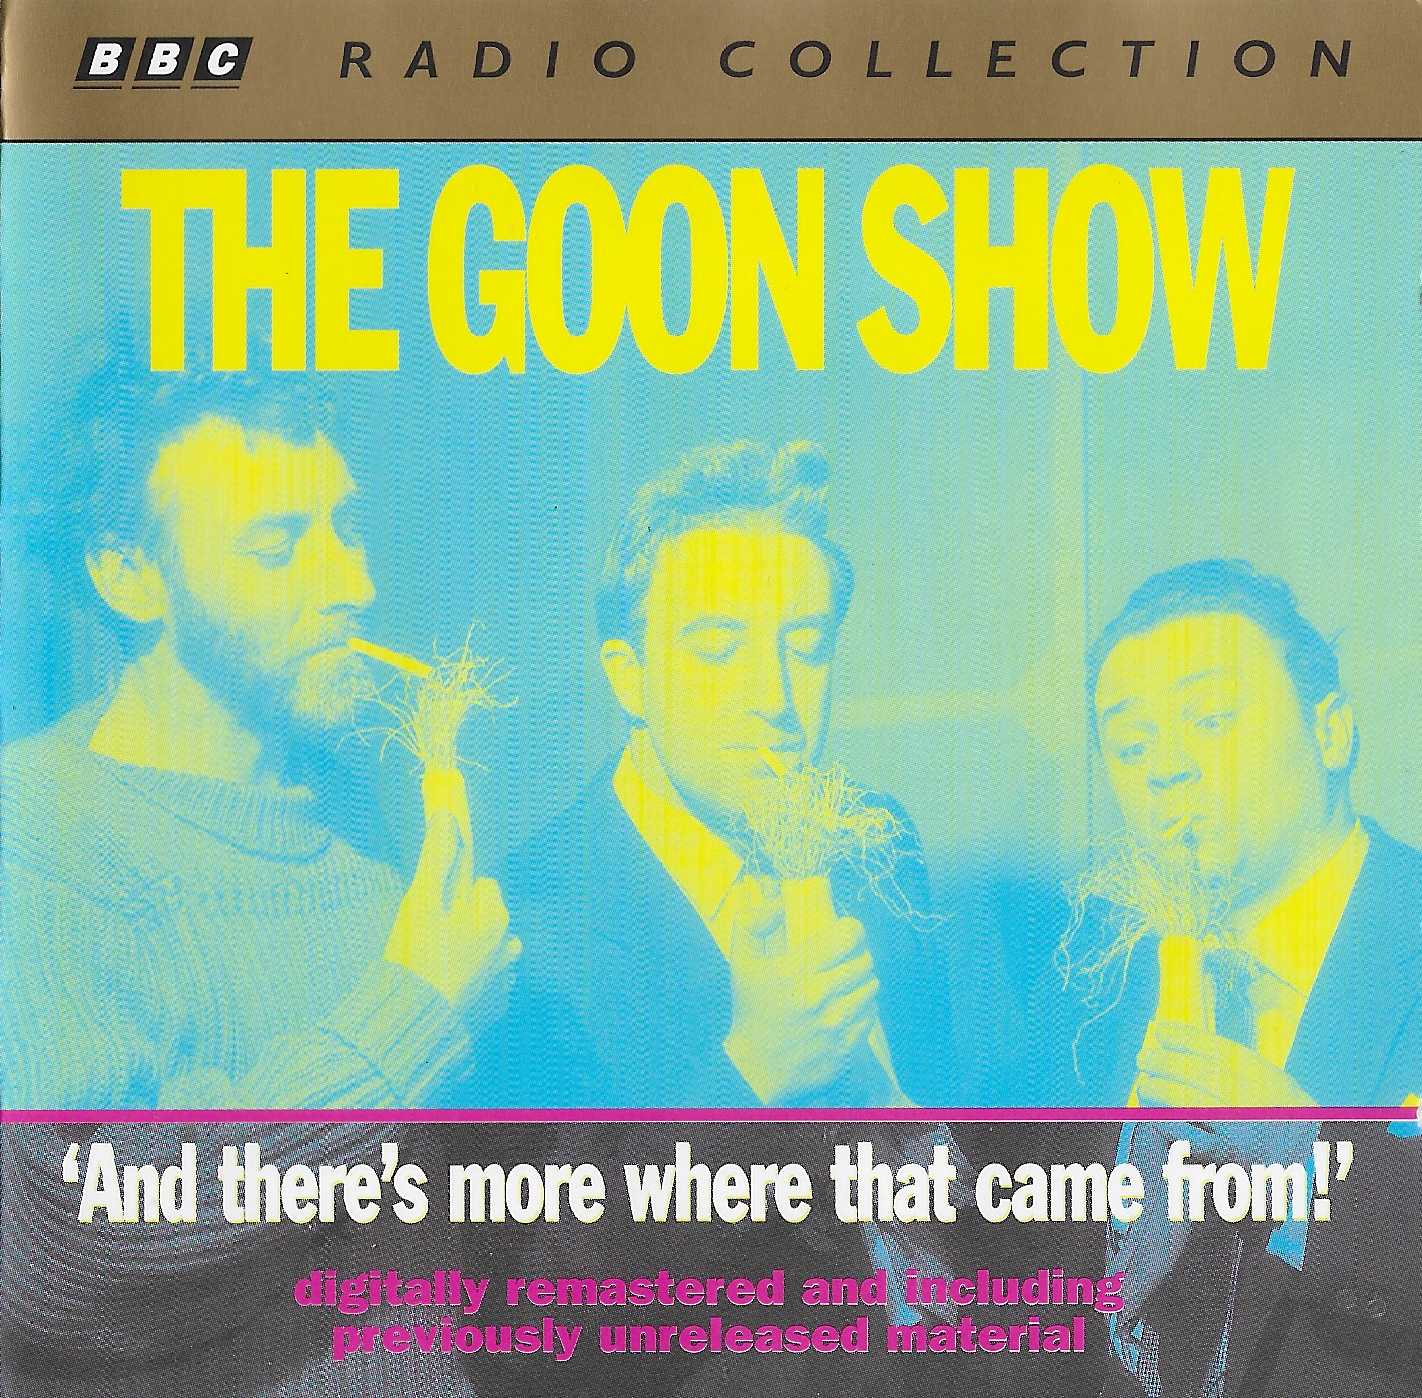 Picture of ZBBC 1868 CD The Goon show 5 - And there's more where that came from! by artist Spike Milligan / Eric Sykes / Larry Stephens from the BBC cds - Records and Tapes library